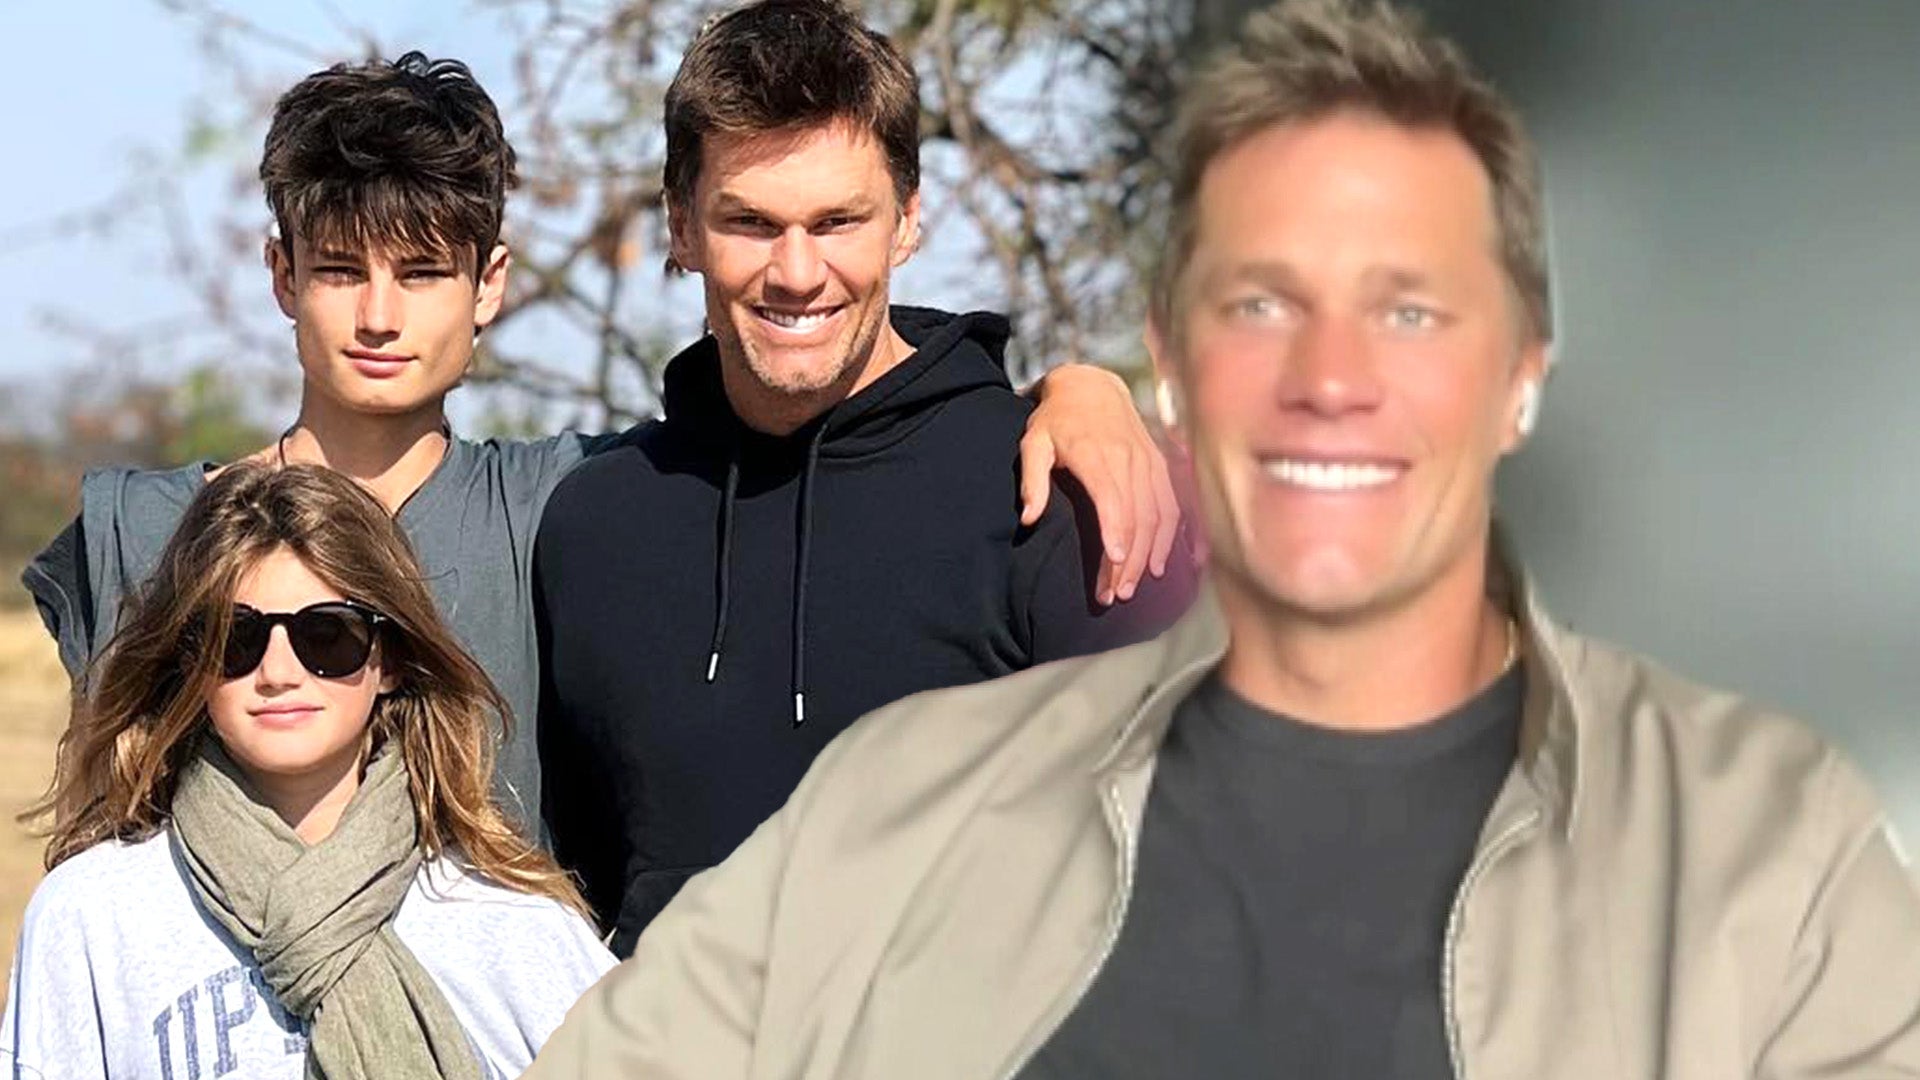 Tom Brady's Kids Surprise Him With Congrats Ahead of Patriots Hall of Fame Induction